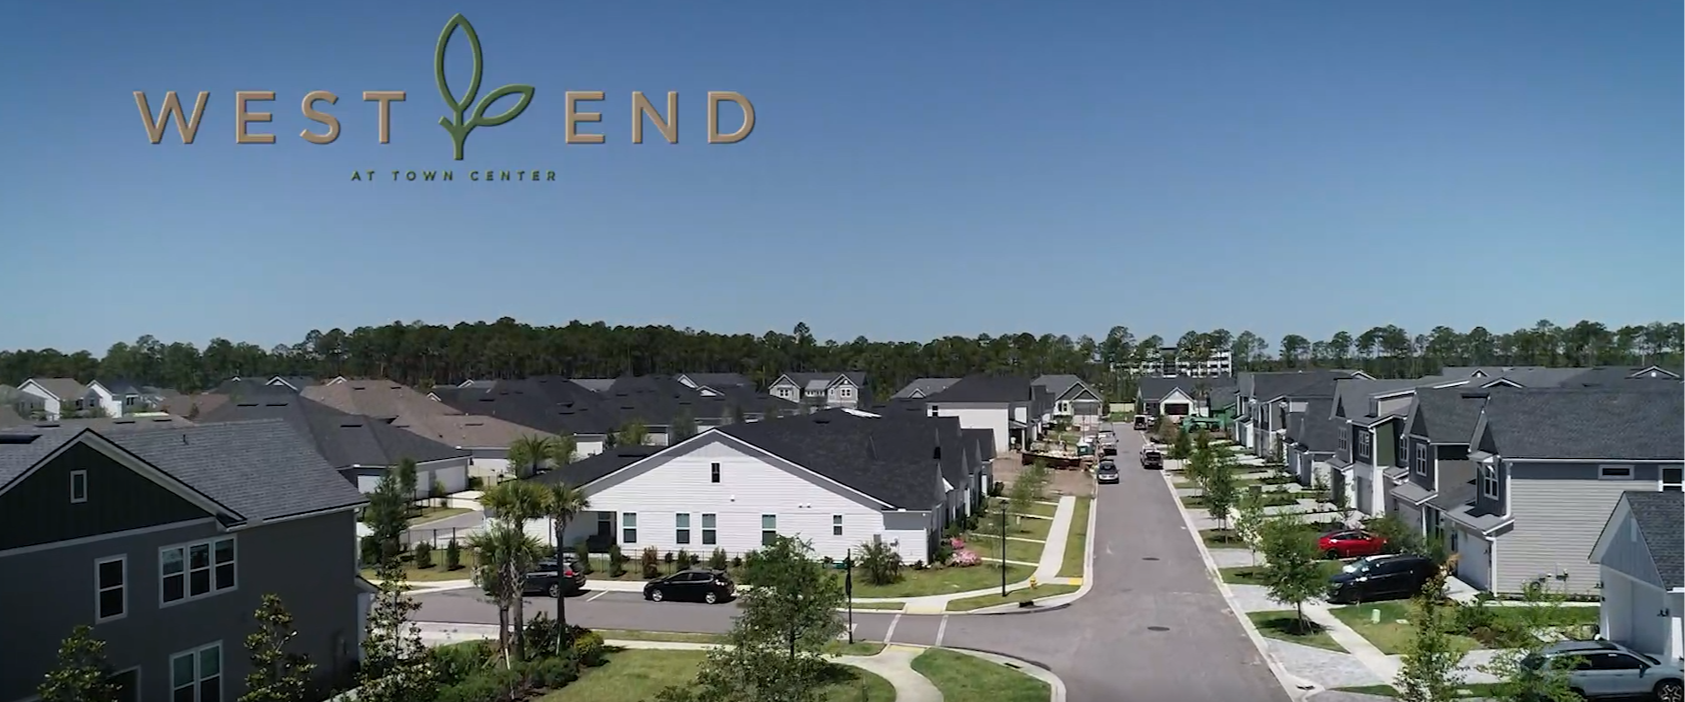 West End at Town Center Villas New Homes